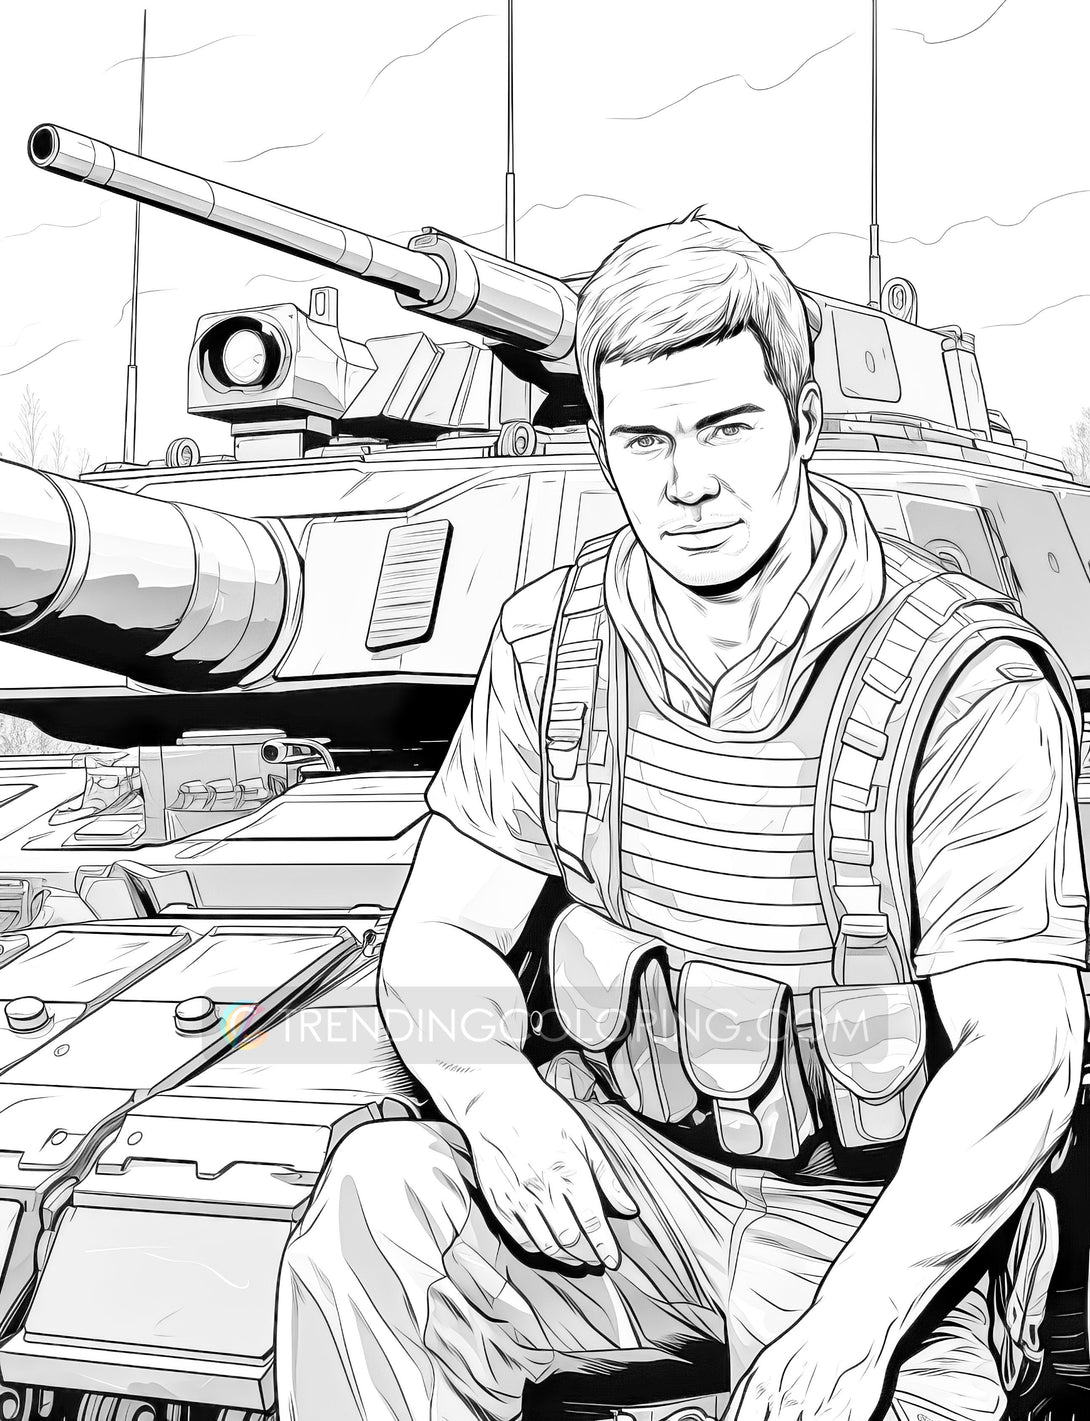 50 Soldier On The Battlefield Coloring Pages - Instant Download - Prin ...